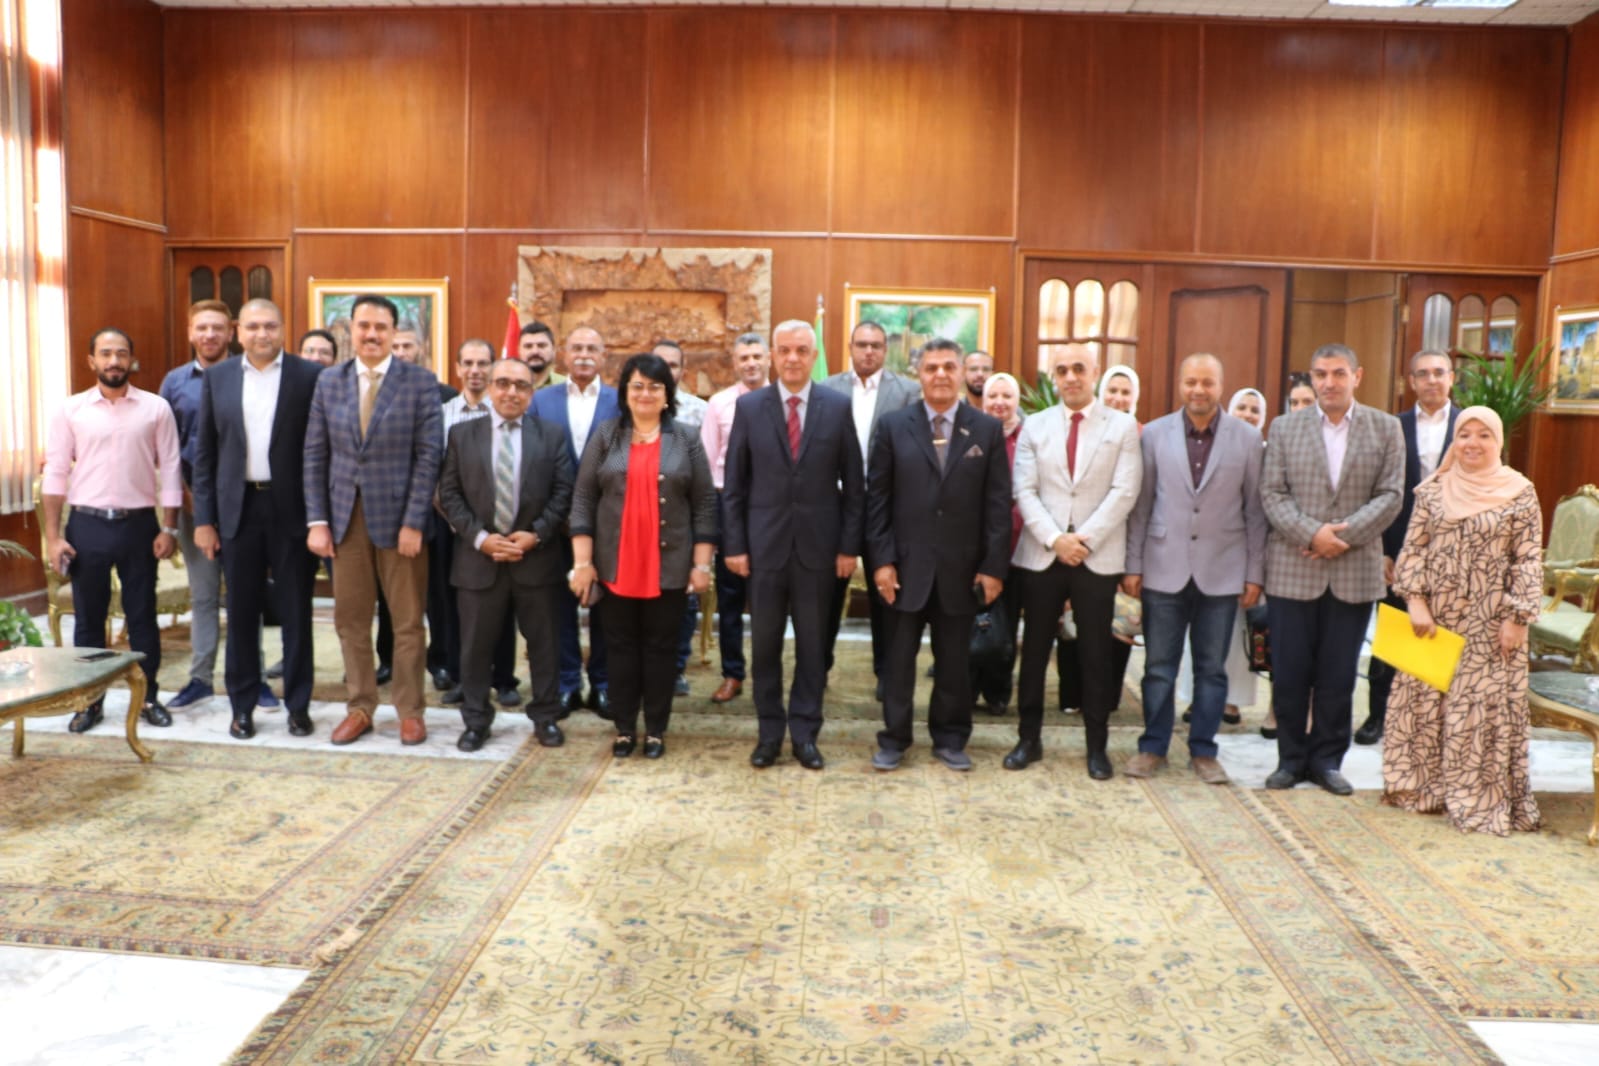 The President of Menoufia University receives a delegation from the top of universities, the Egyptian Knowledge Bank and Thinqi officials